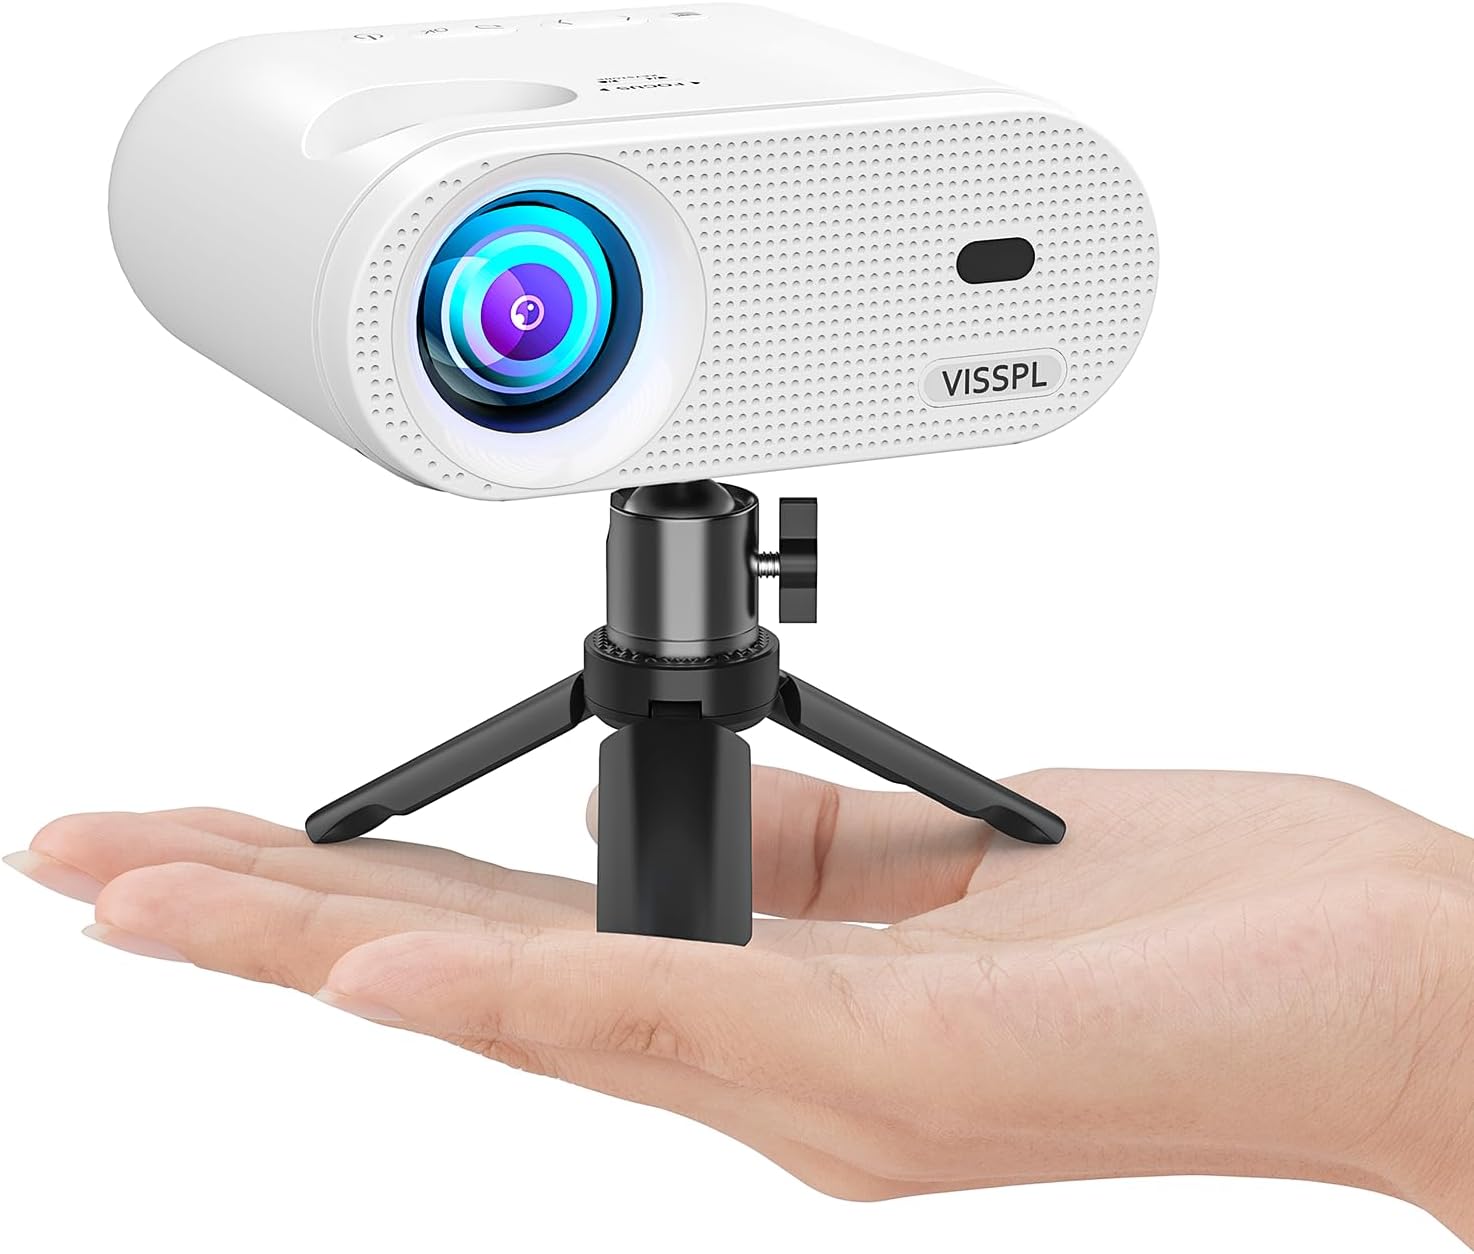 ‘Excellent for movie night’ say Amazon shoppers racing to buy £100 projector reduced to £60